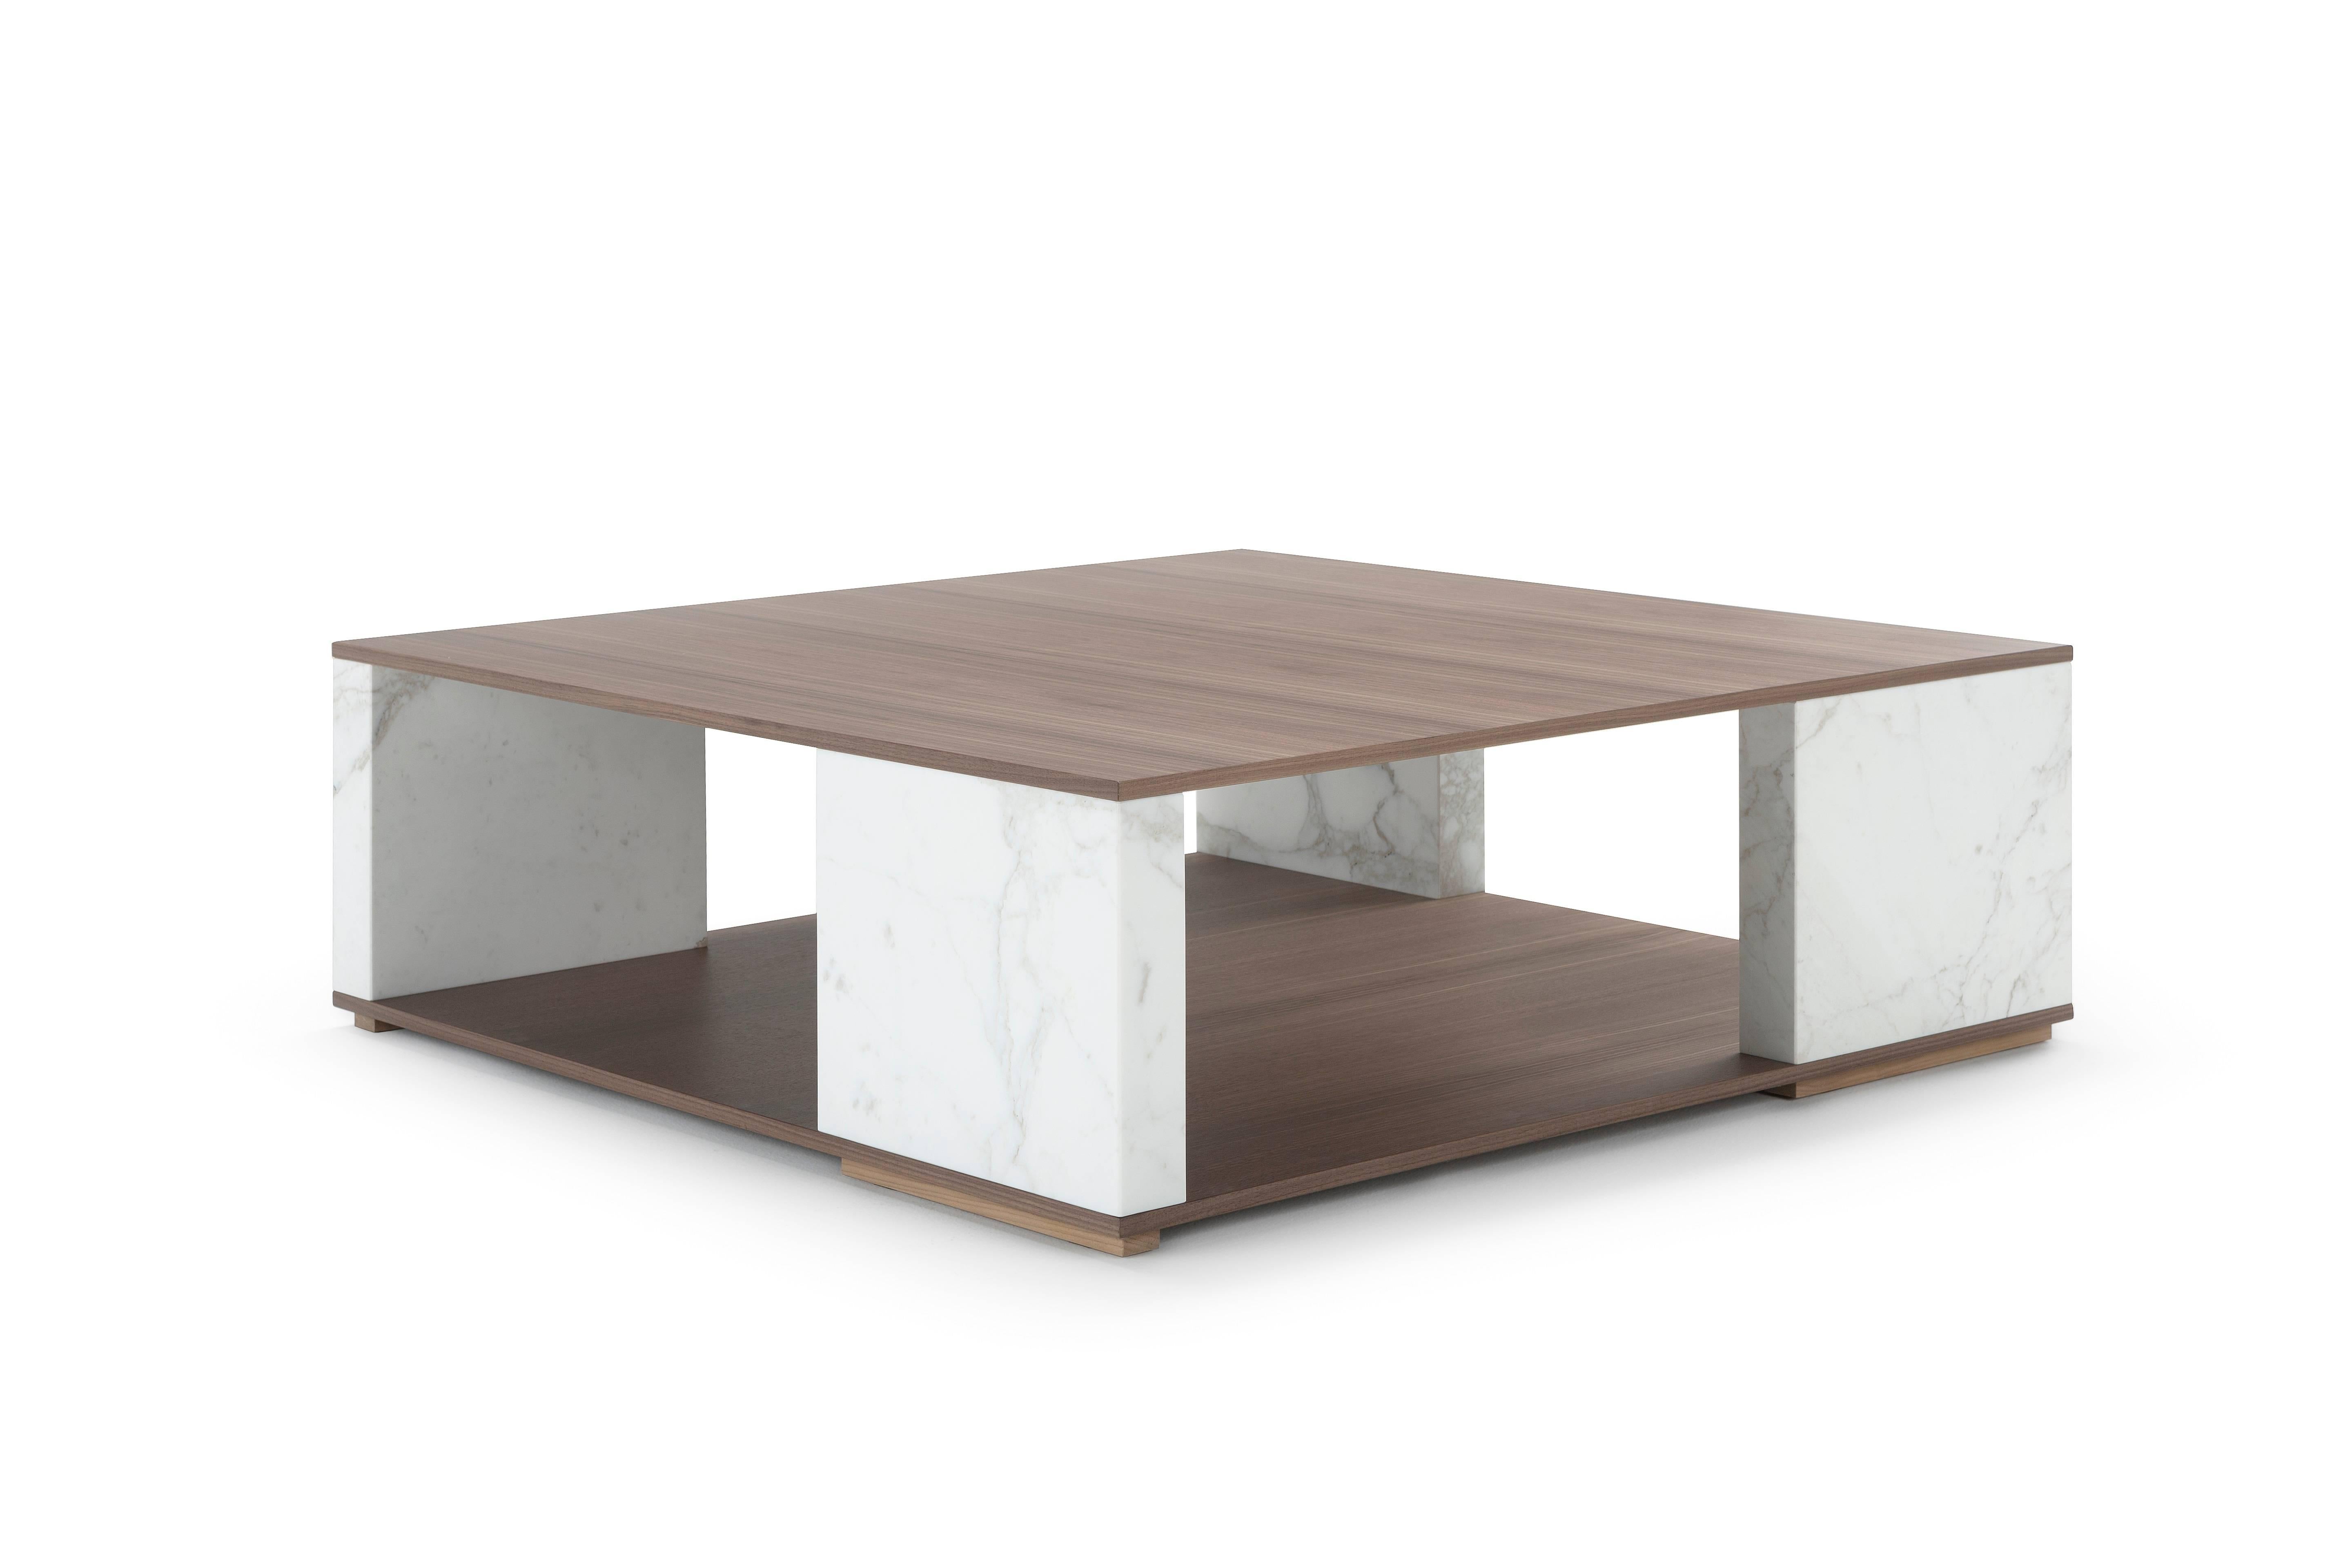 Quattropietre 

A coffee table that embodies the application of an architectonic stereotype to a furniture piece. Quattropietre represents the so-called “golden ratio” of classic architecture tradition, in a mathematical equilibrium of